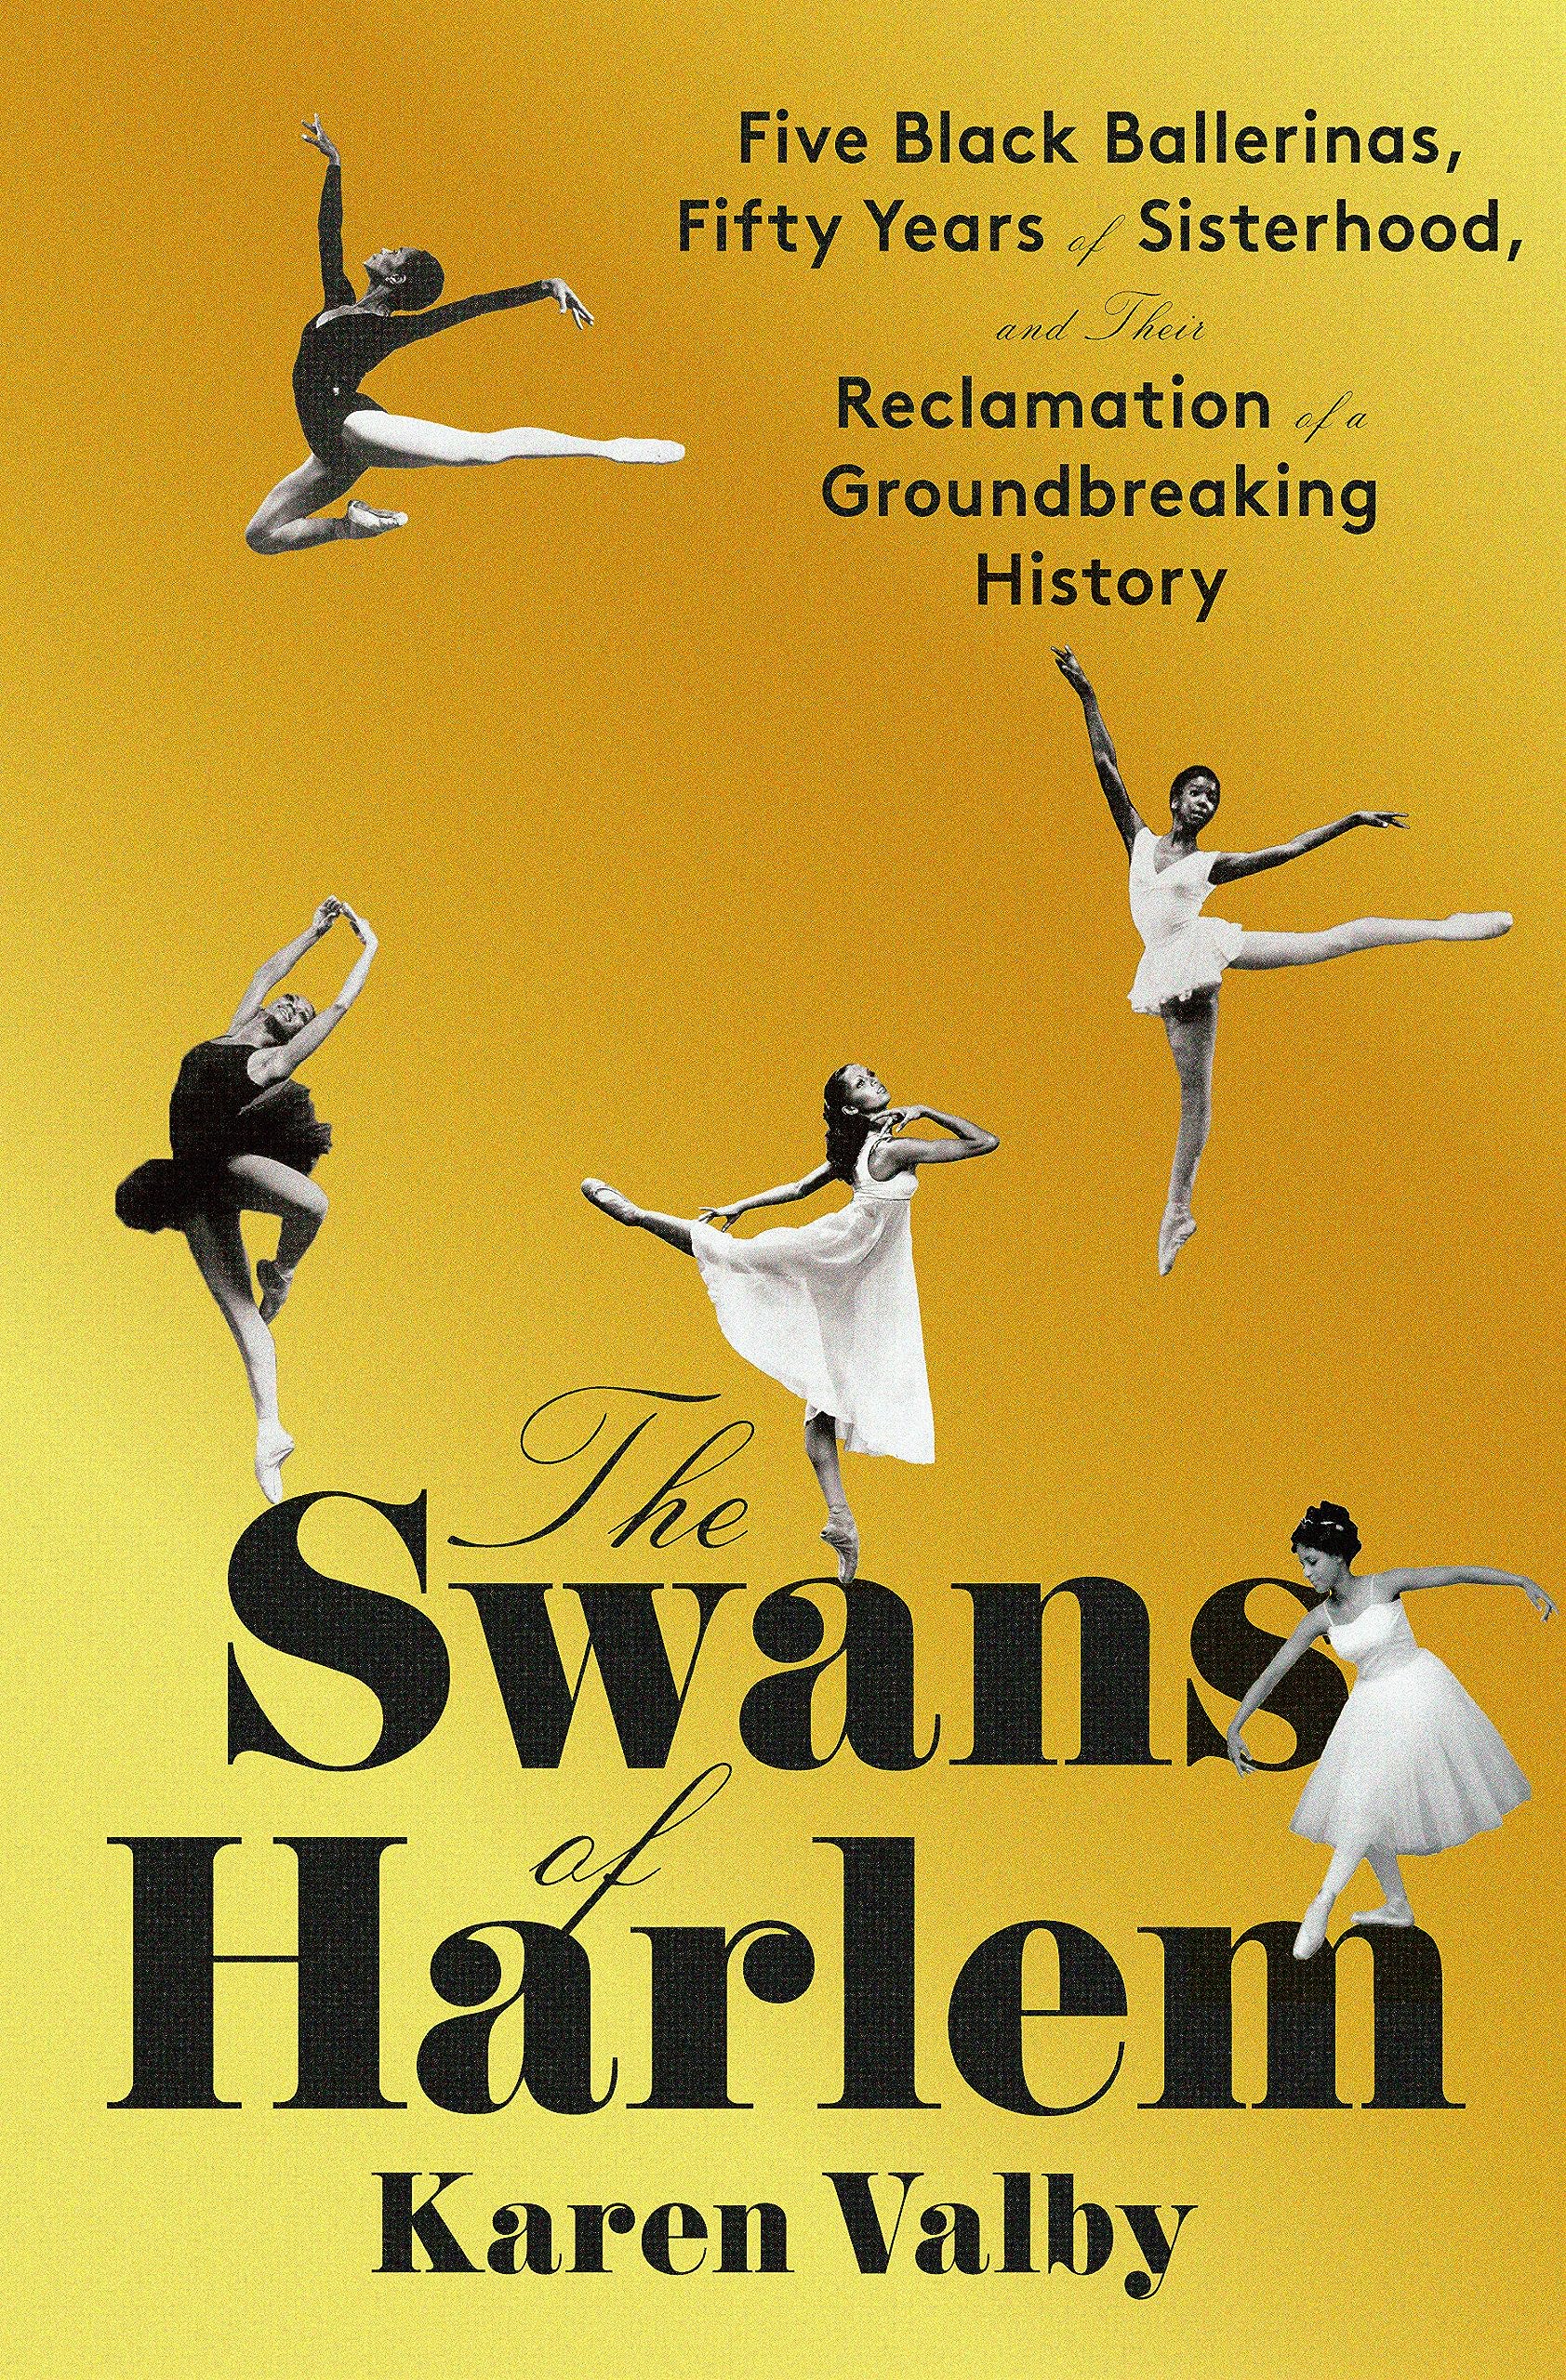 Image for "The Swans of Harlem"